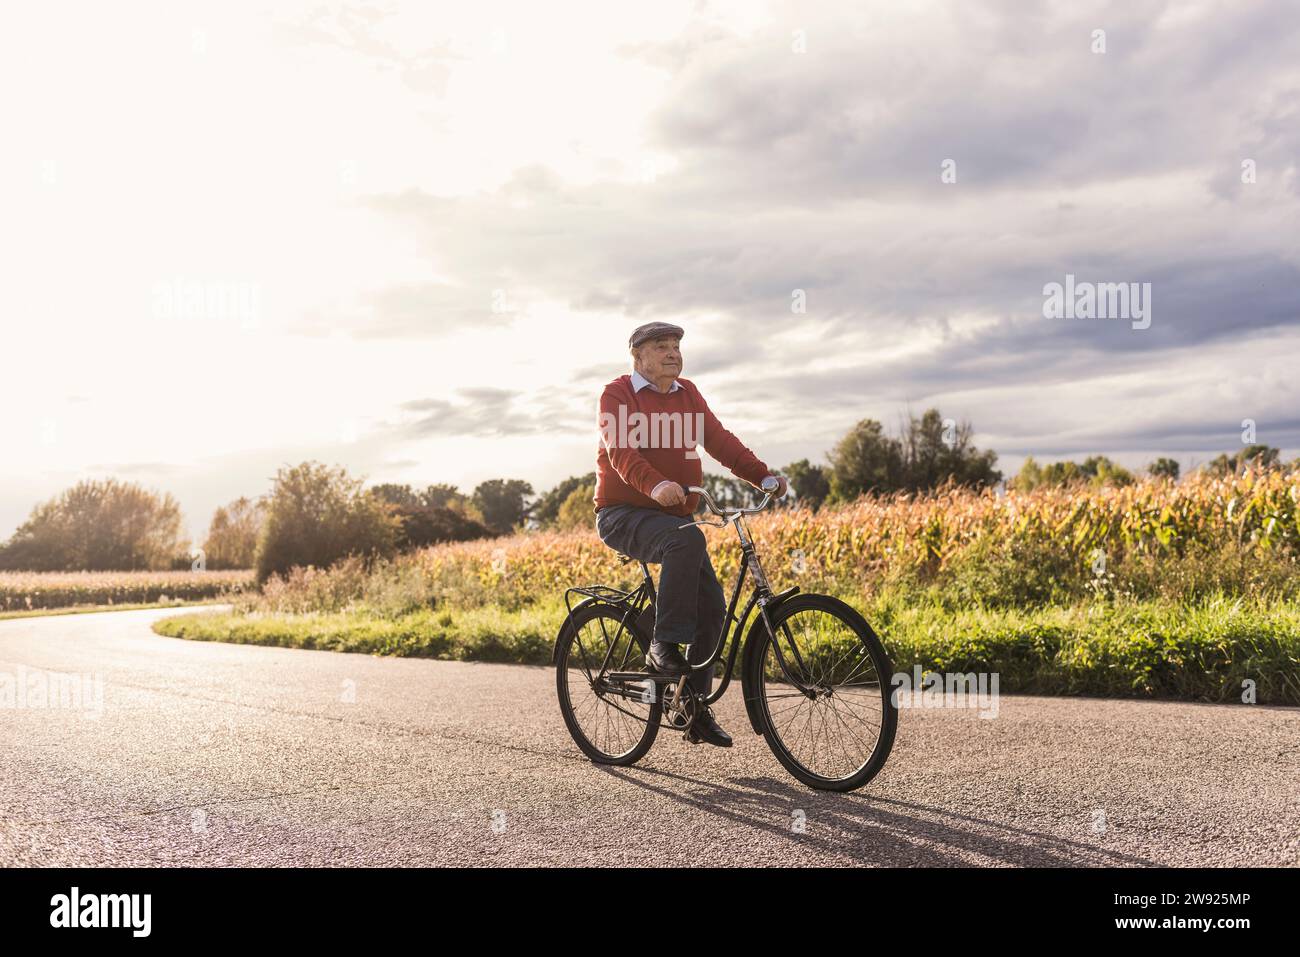 Senior man cycling on road under cloudy sky Stock Photo